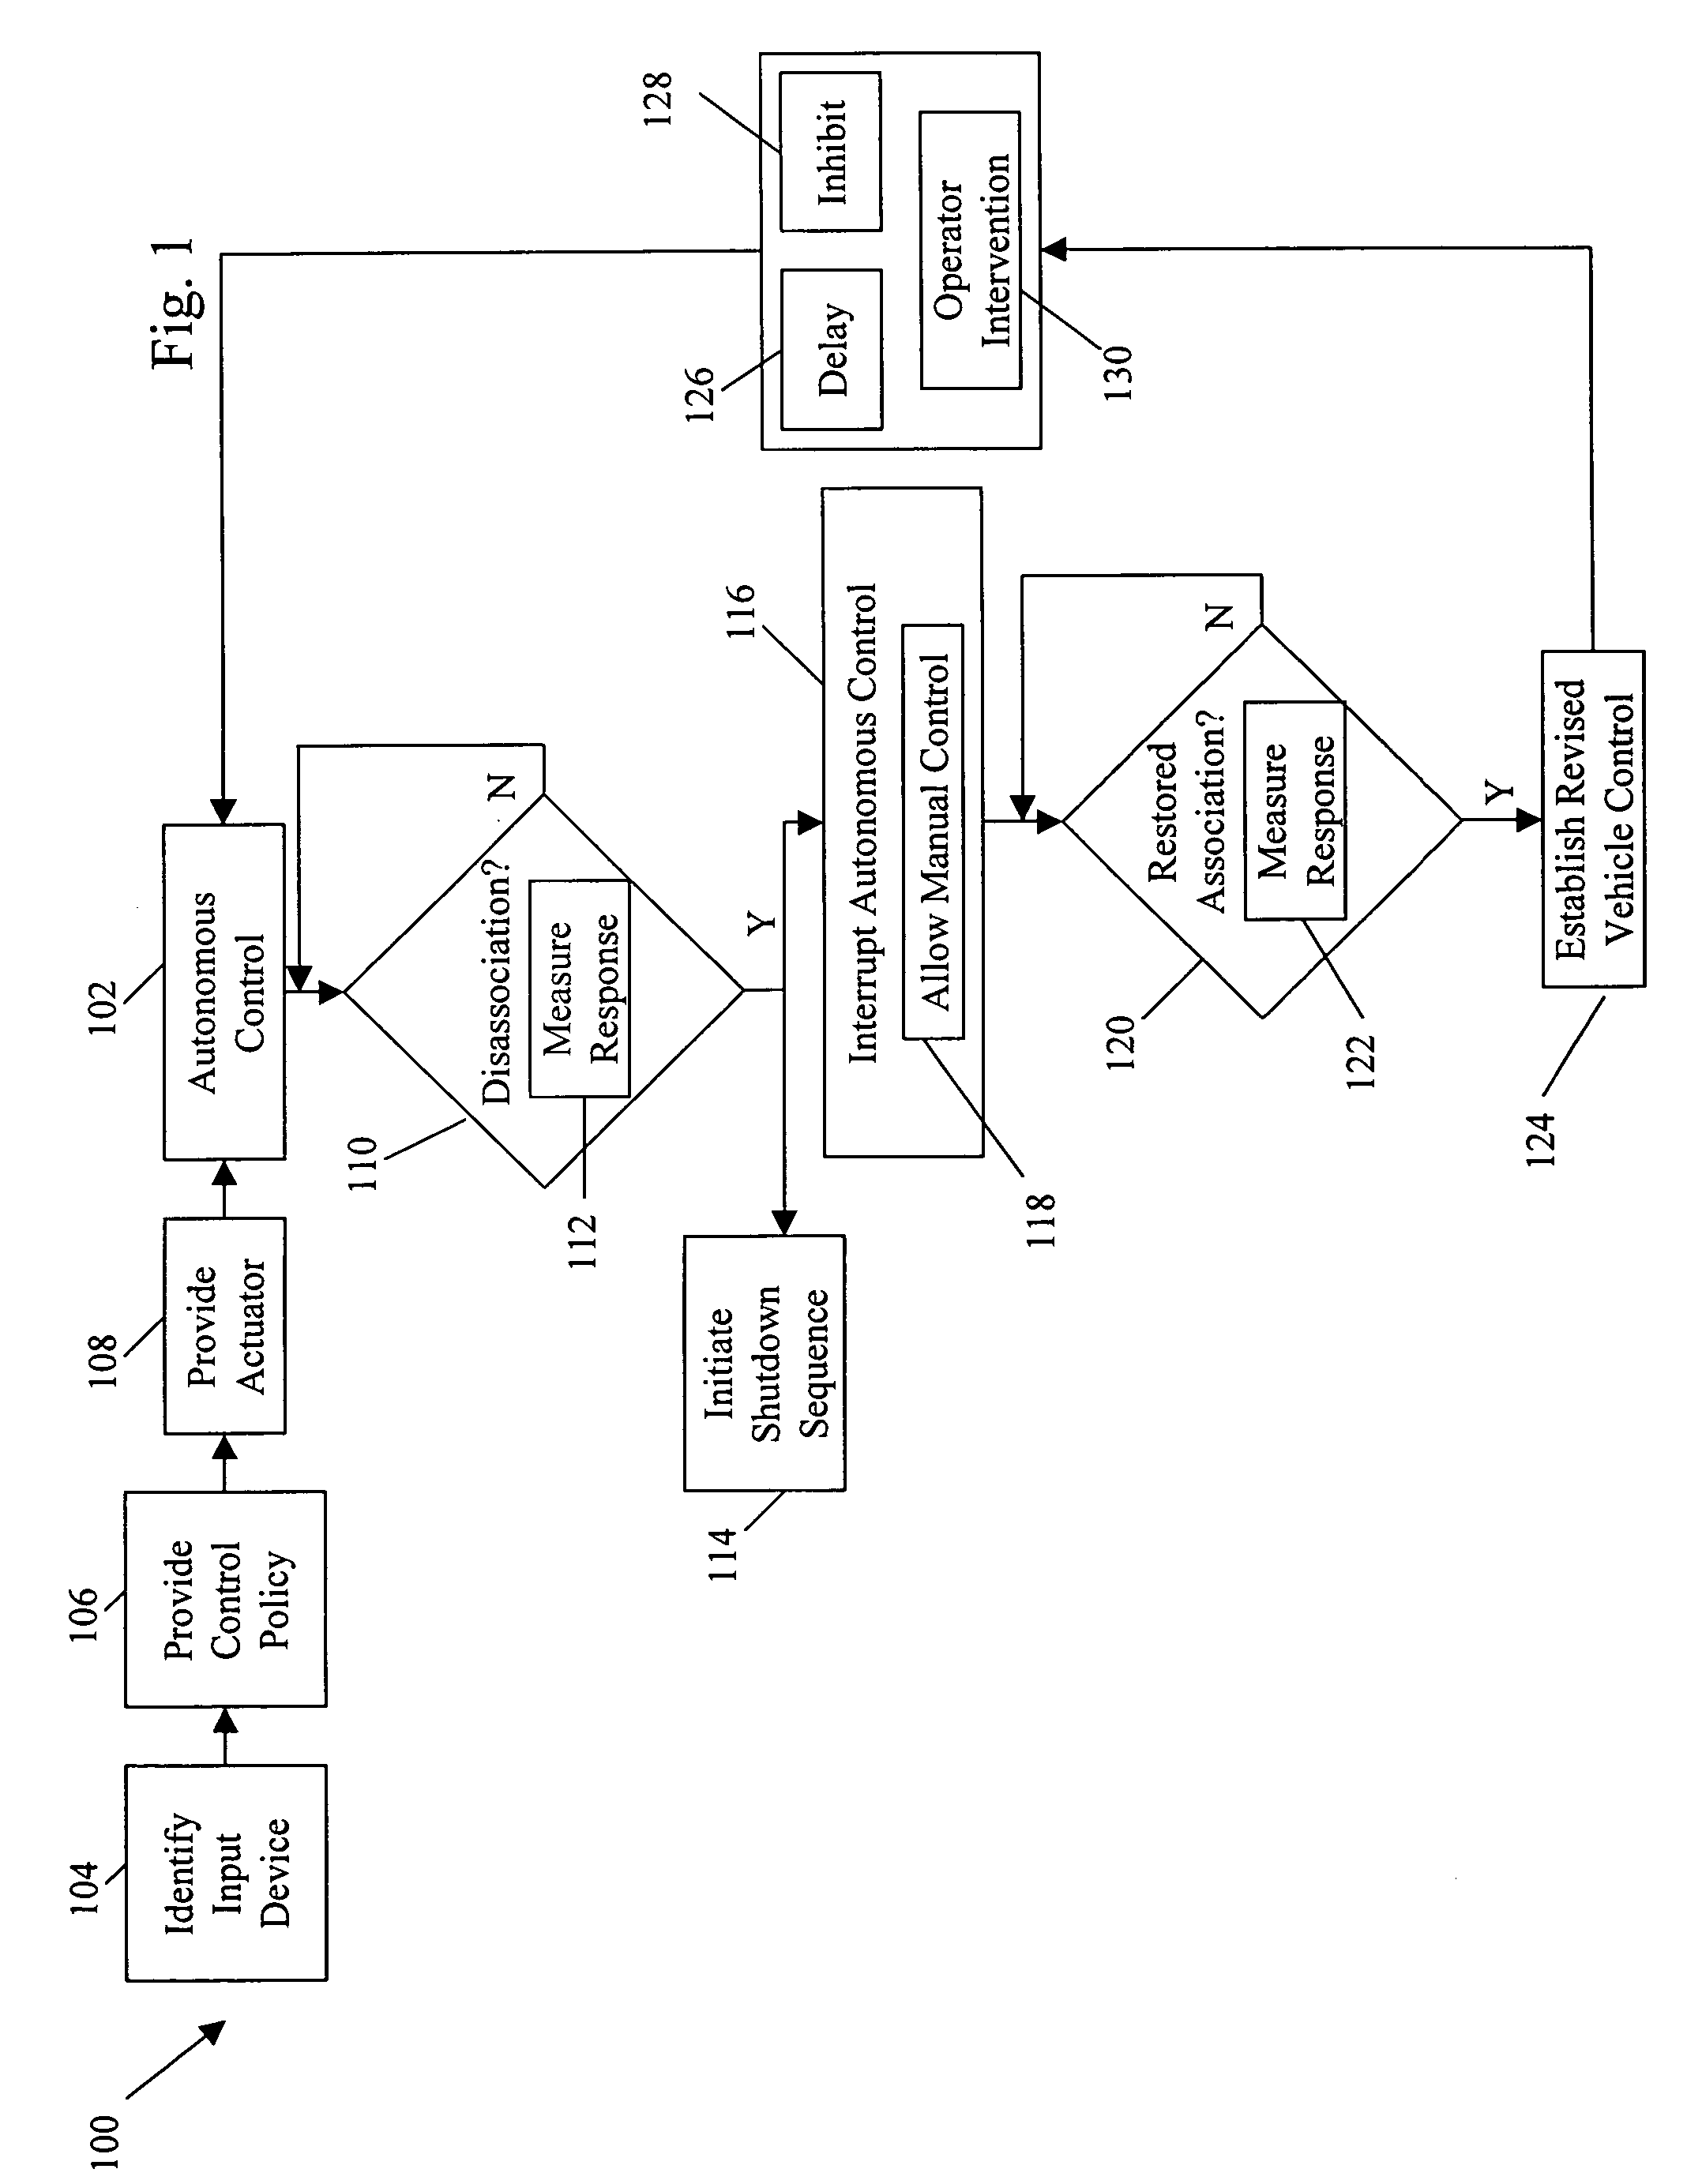 Systems and methods for control of an unmanned ground vehicle